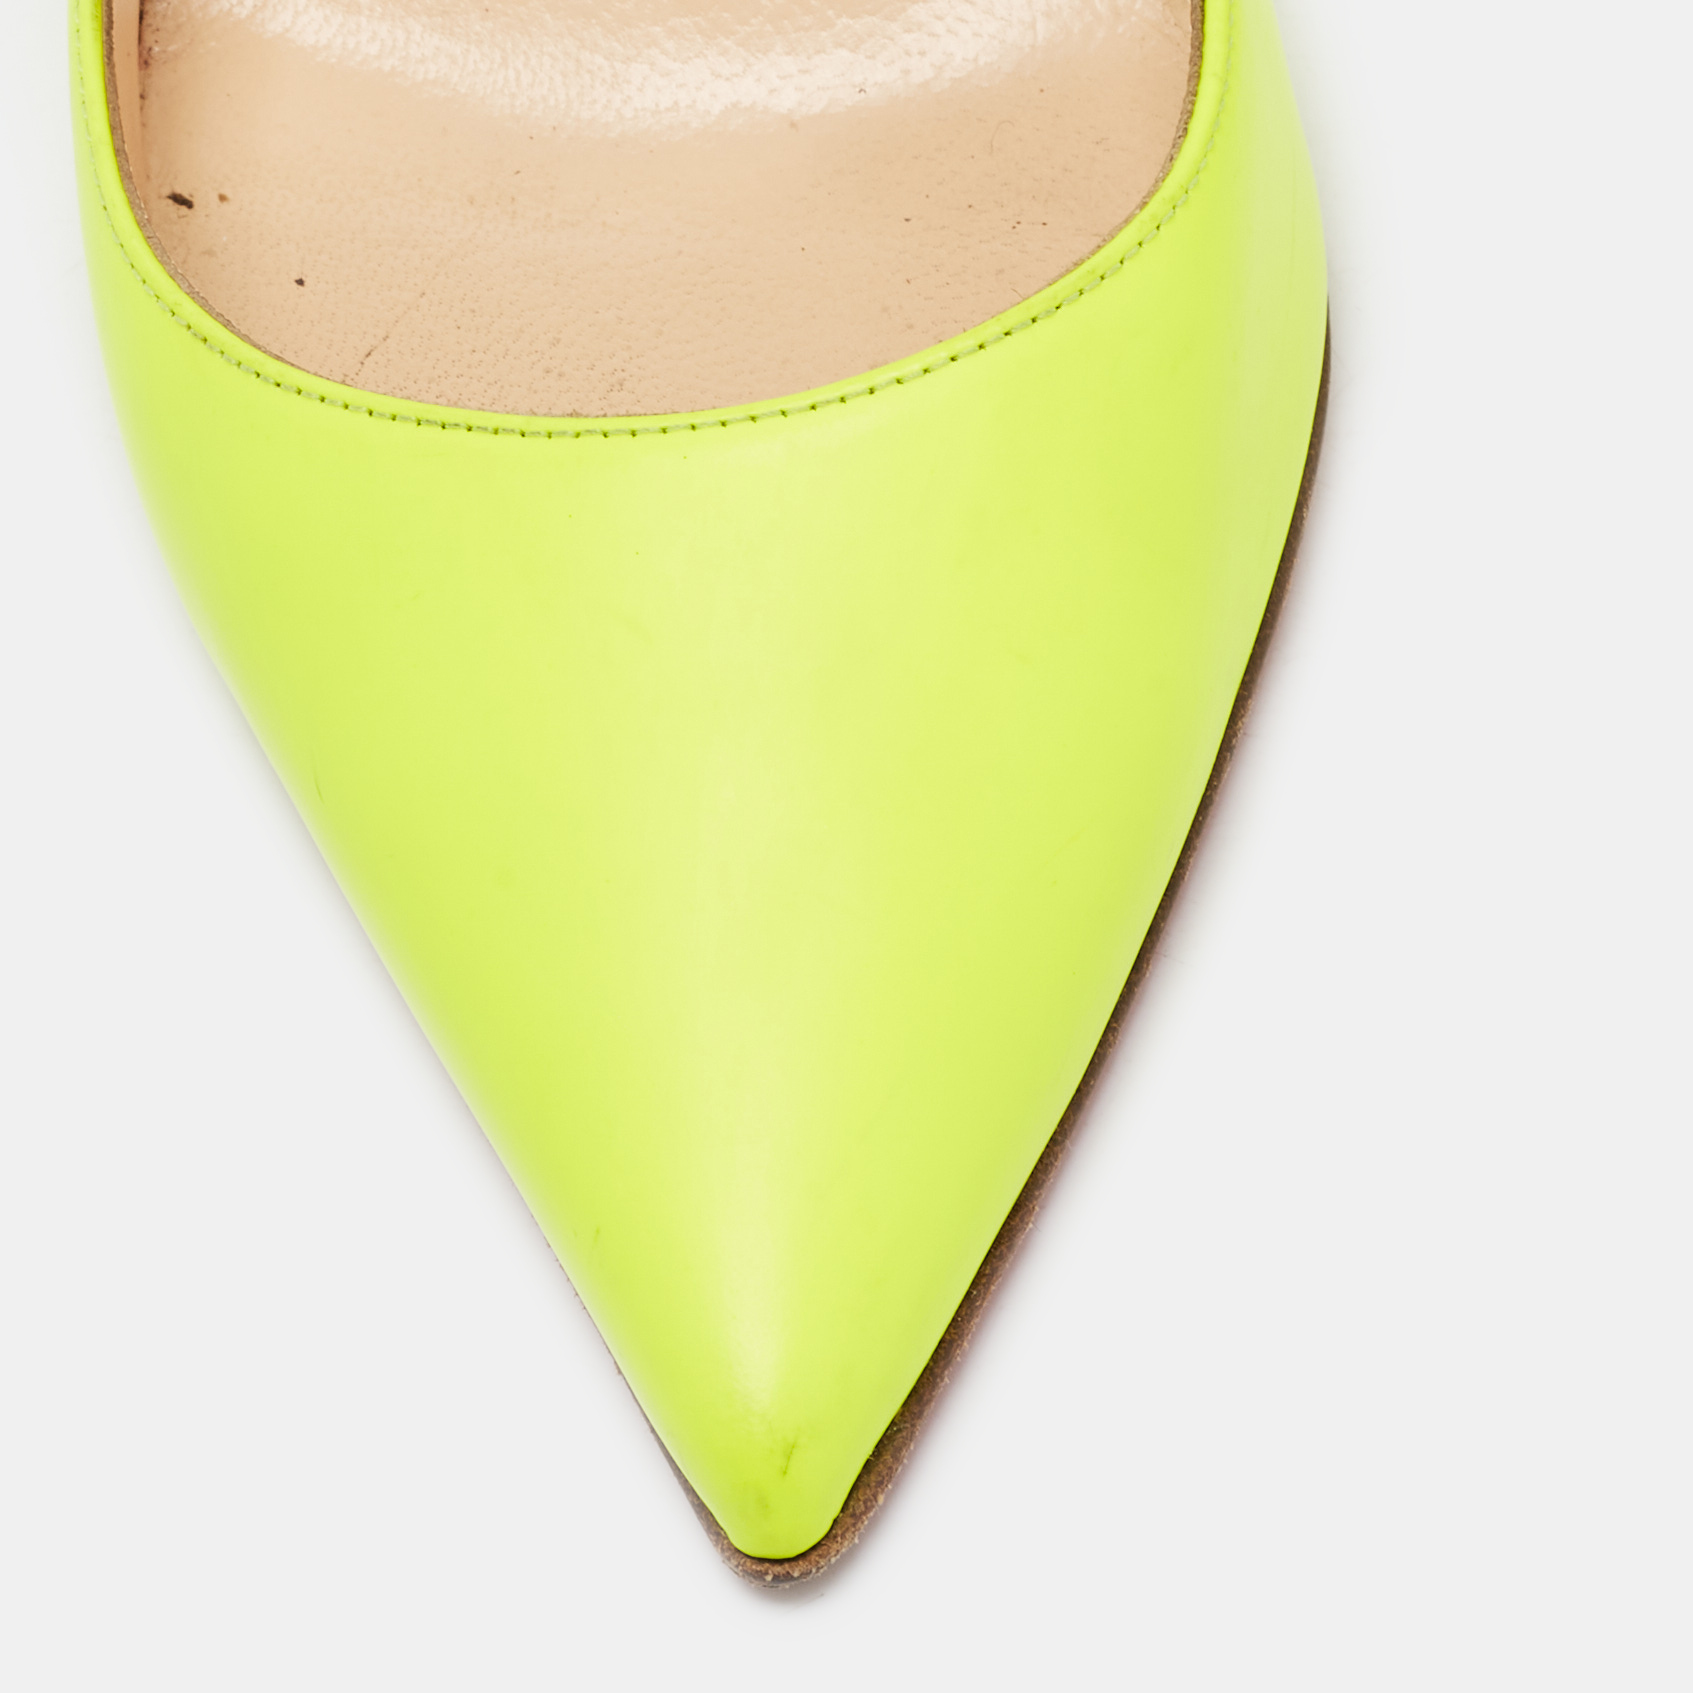 Christian Louboutin Green Leather So Kate Pumps Size 37.5